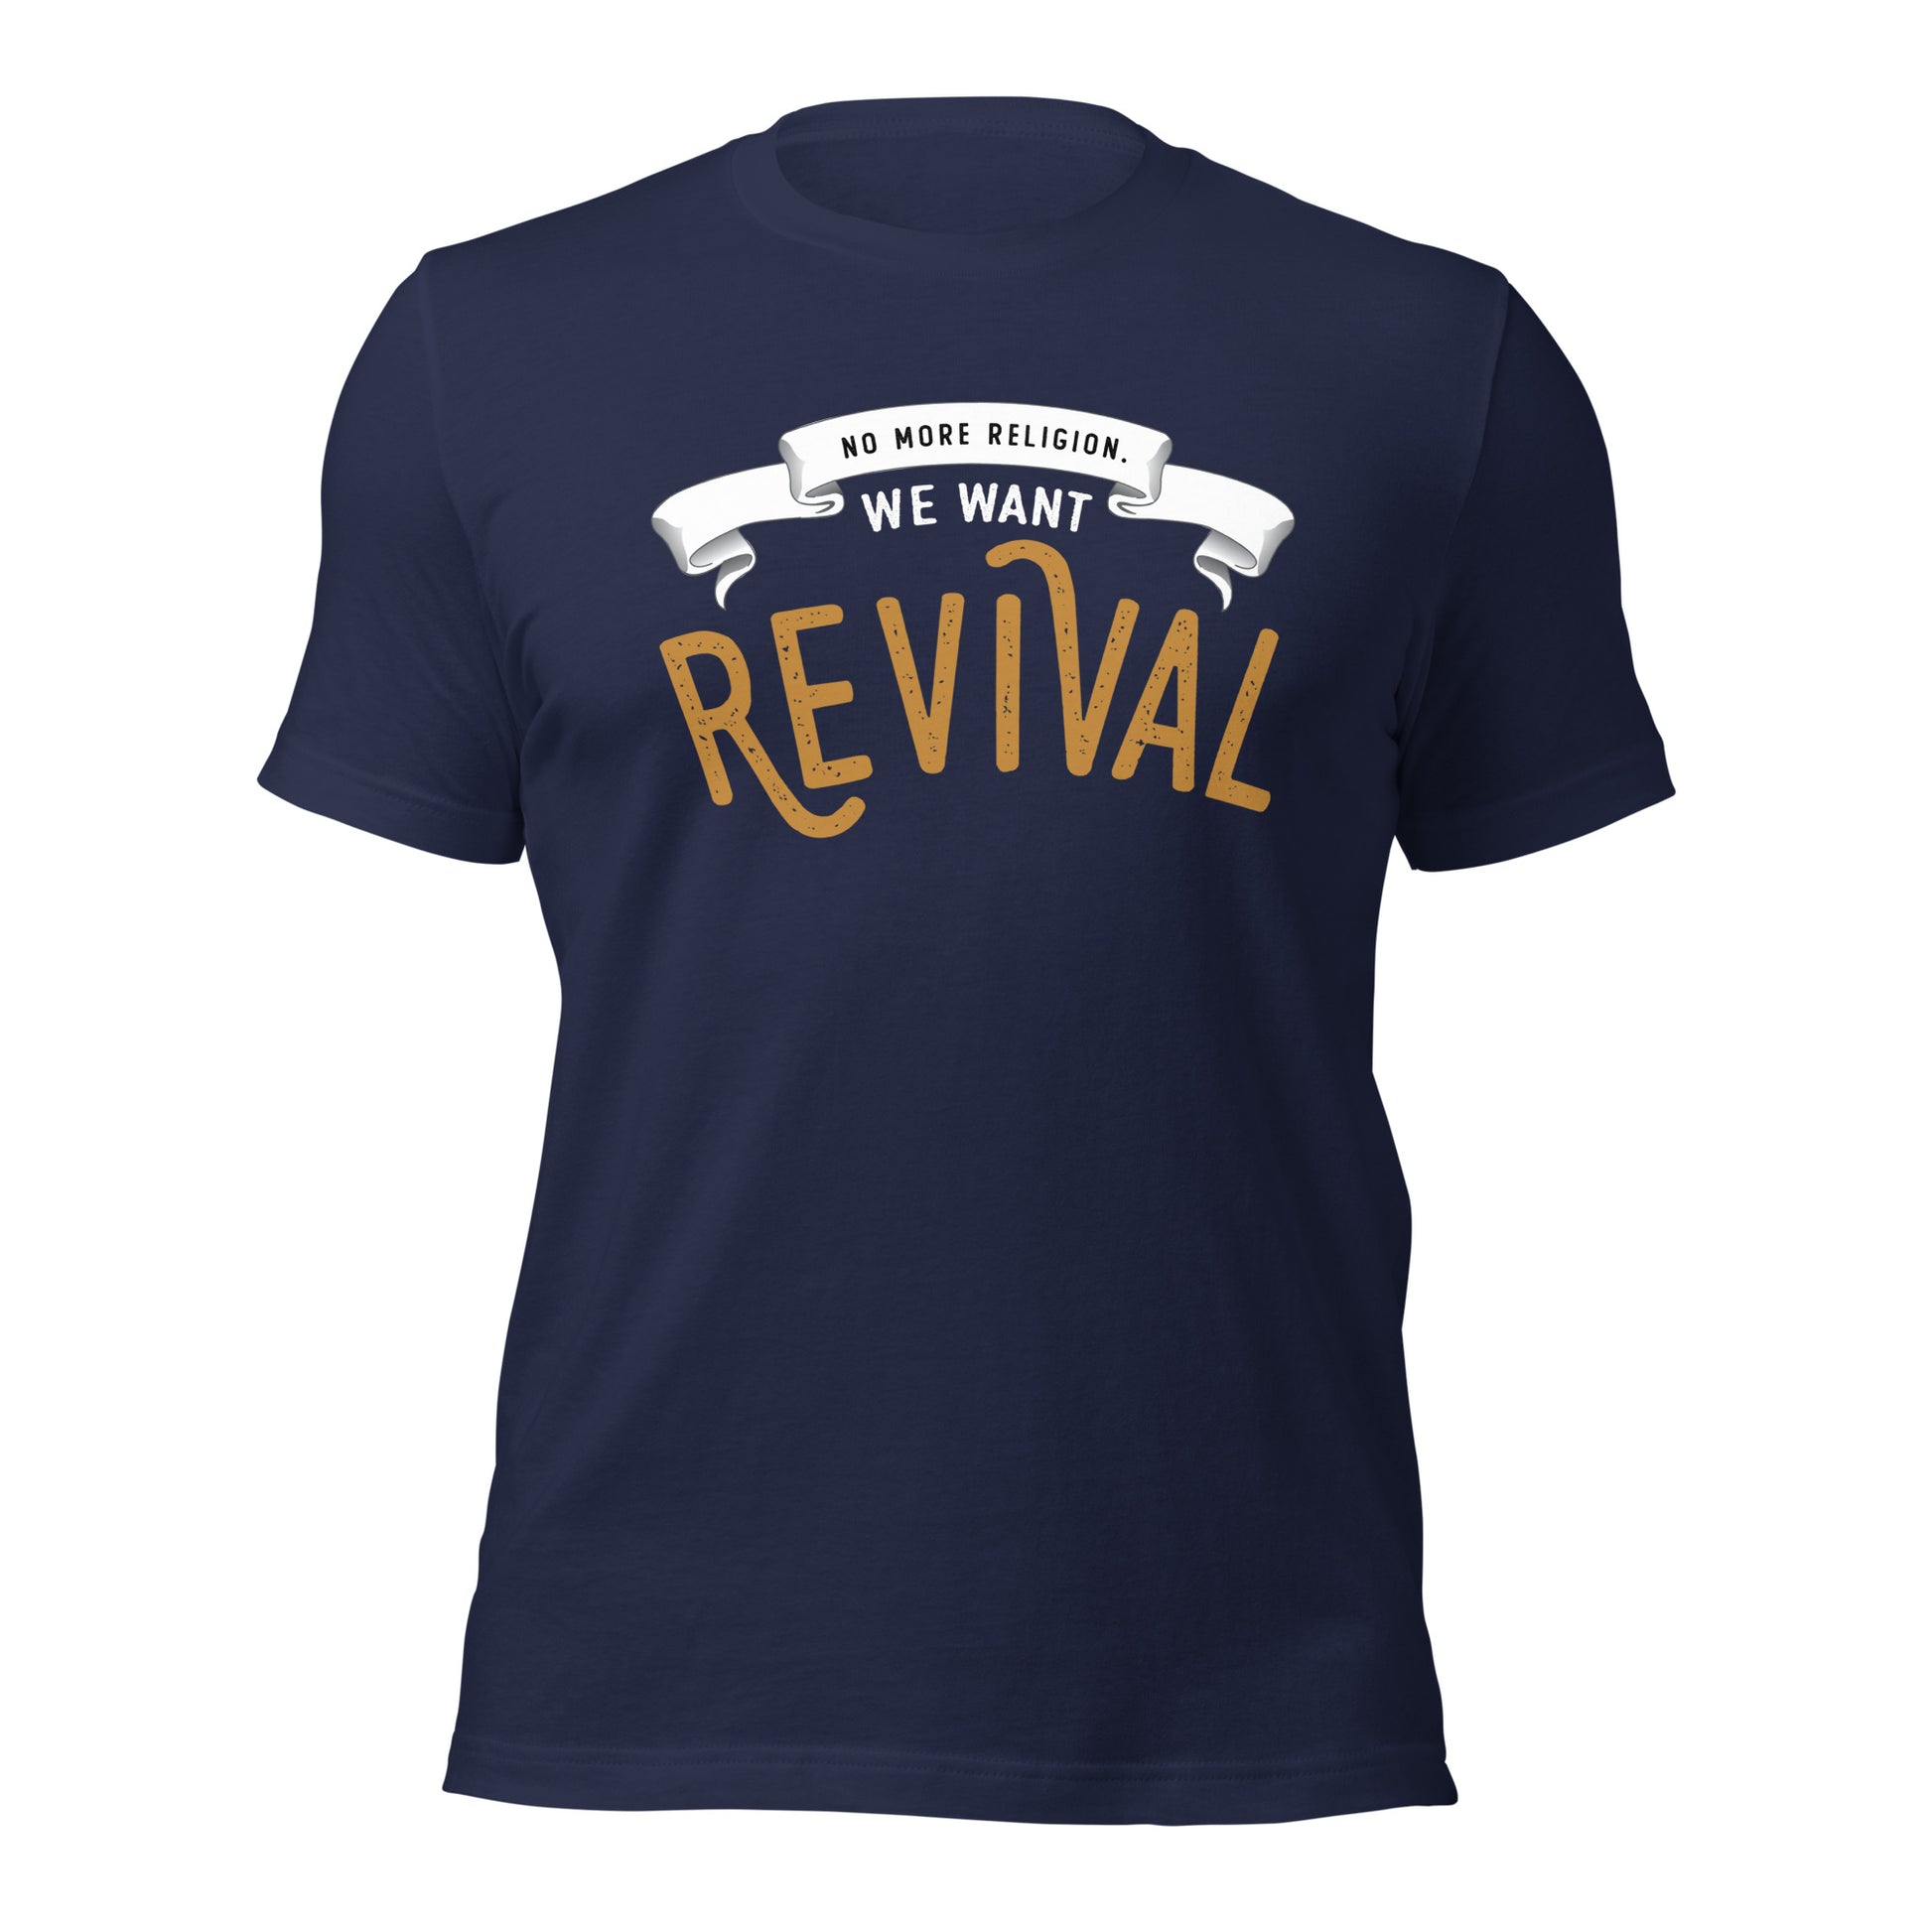 Navy Blue Christian aesthetic soft Unisex T-shirt that says, No More Religion We Want Revival printed in gold and white, church gift Jesus graphic tees designed for men and women 